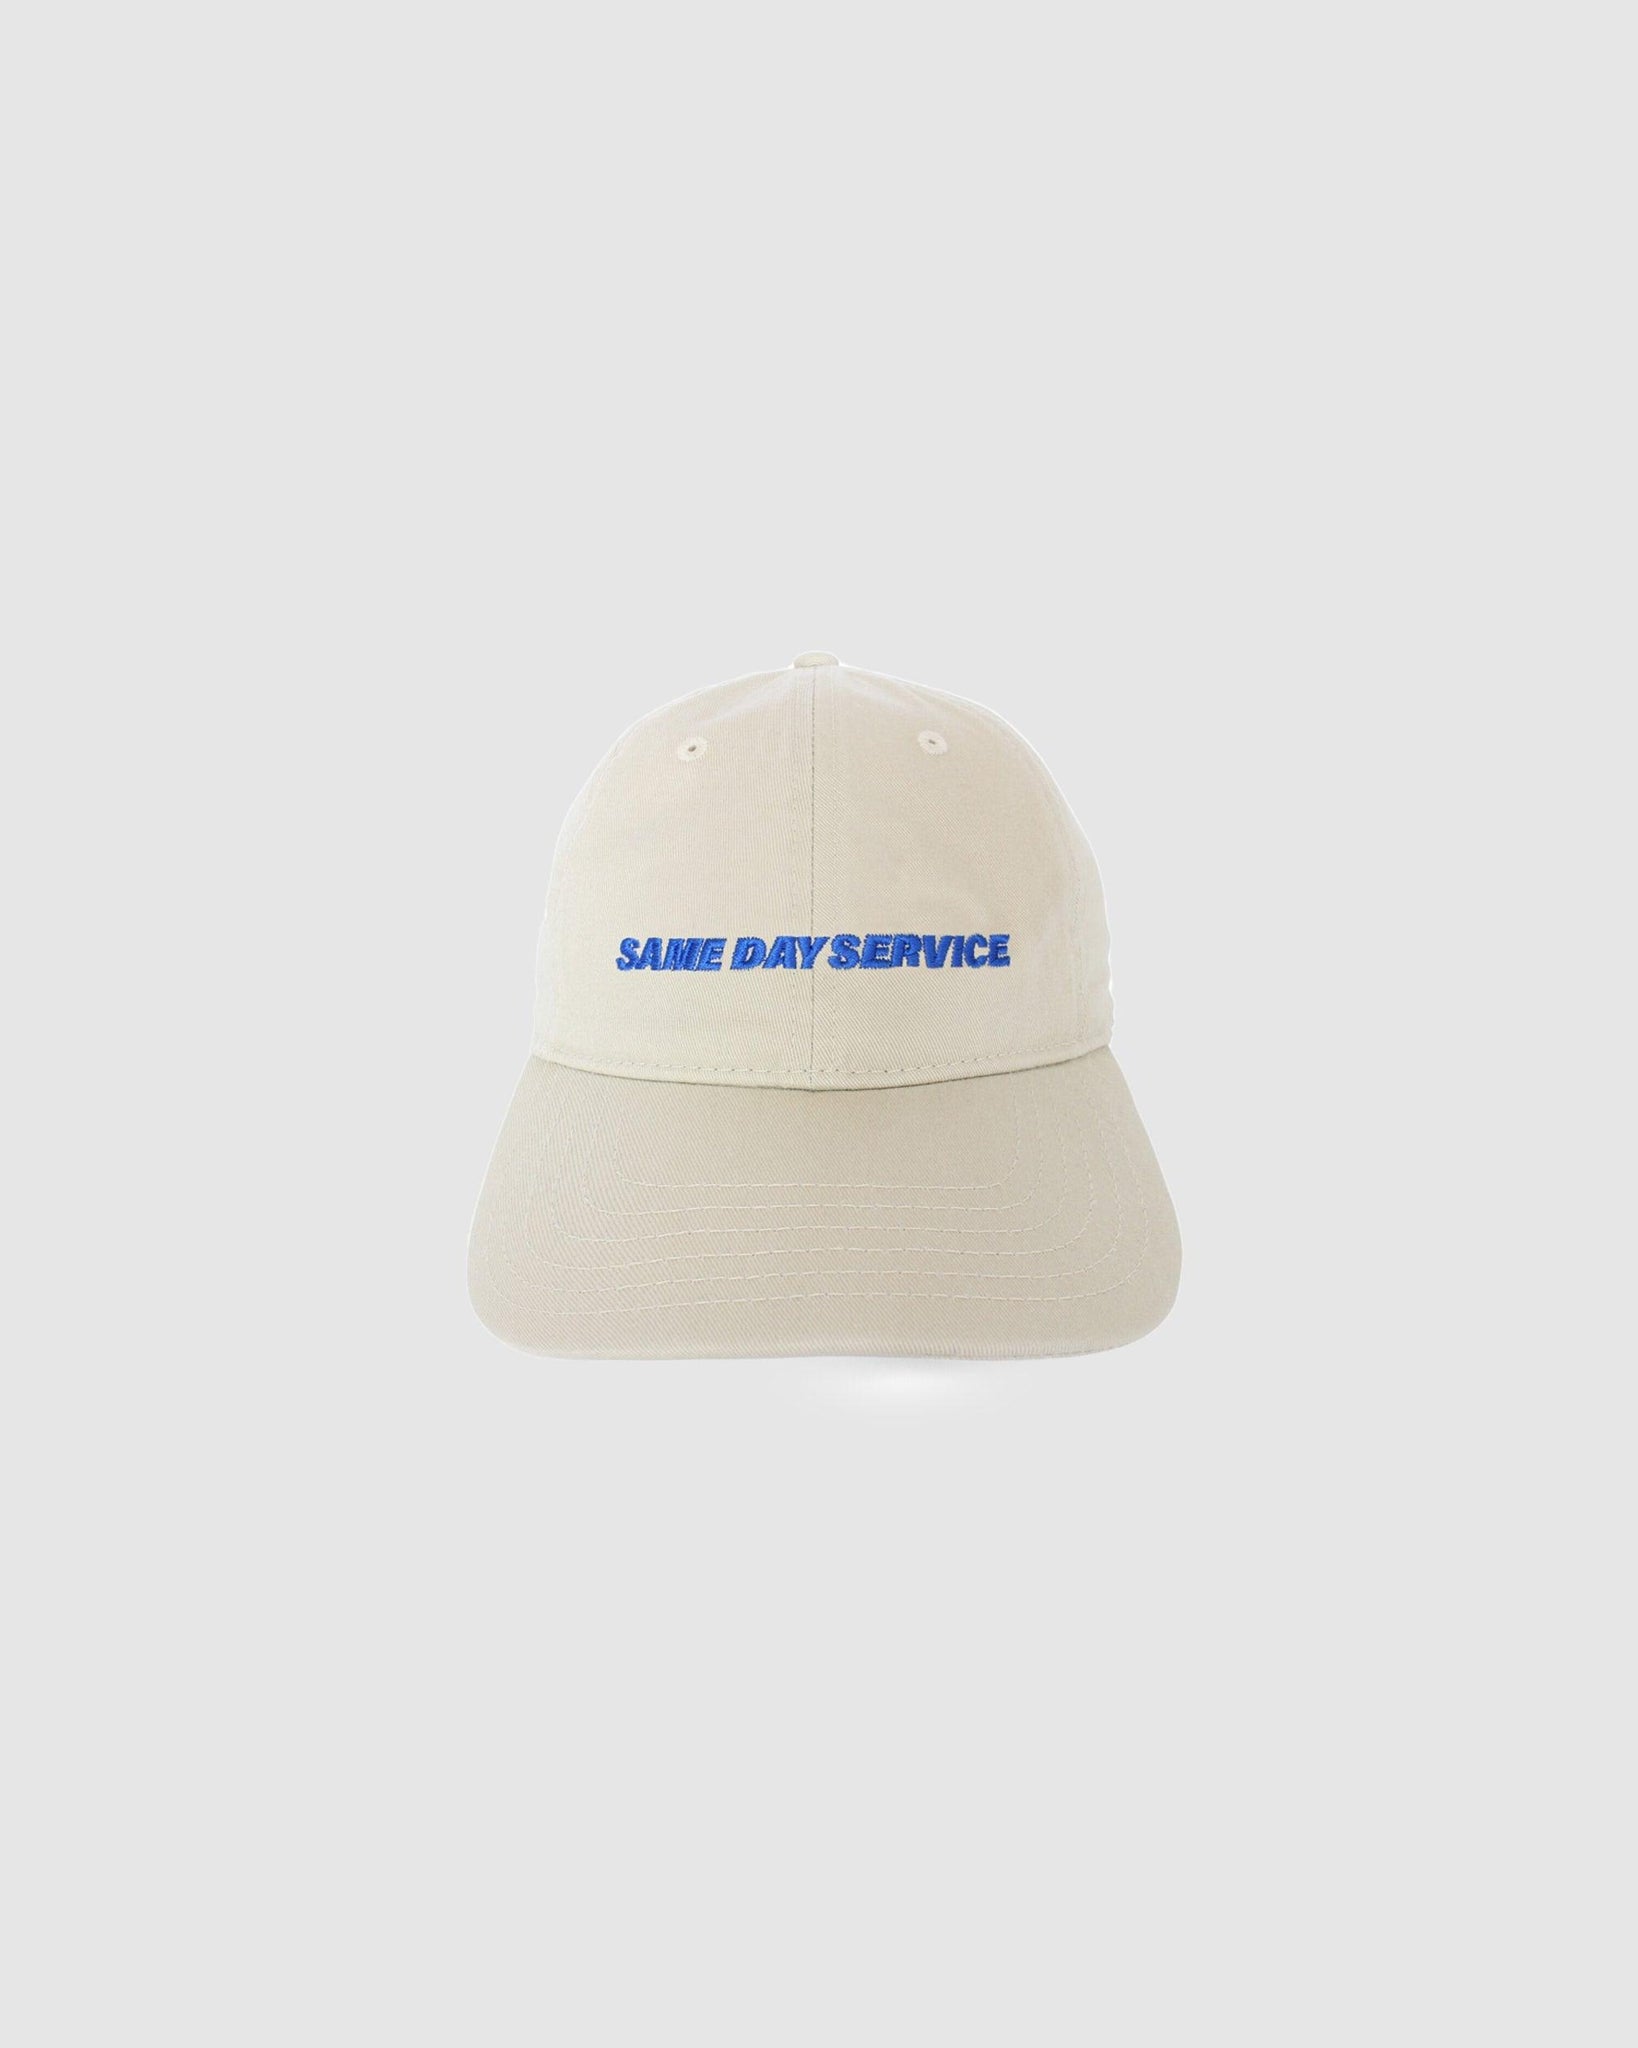 Same Day Service Hat - {{ collection.title }} - Chinatown Country Club 